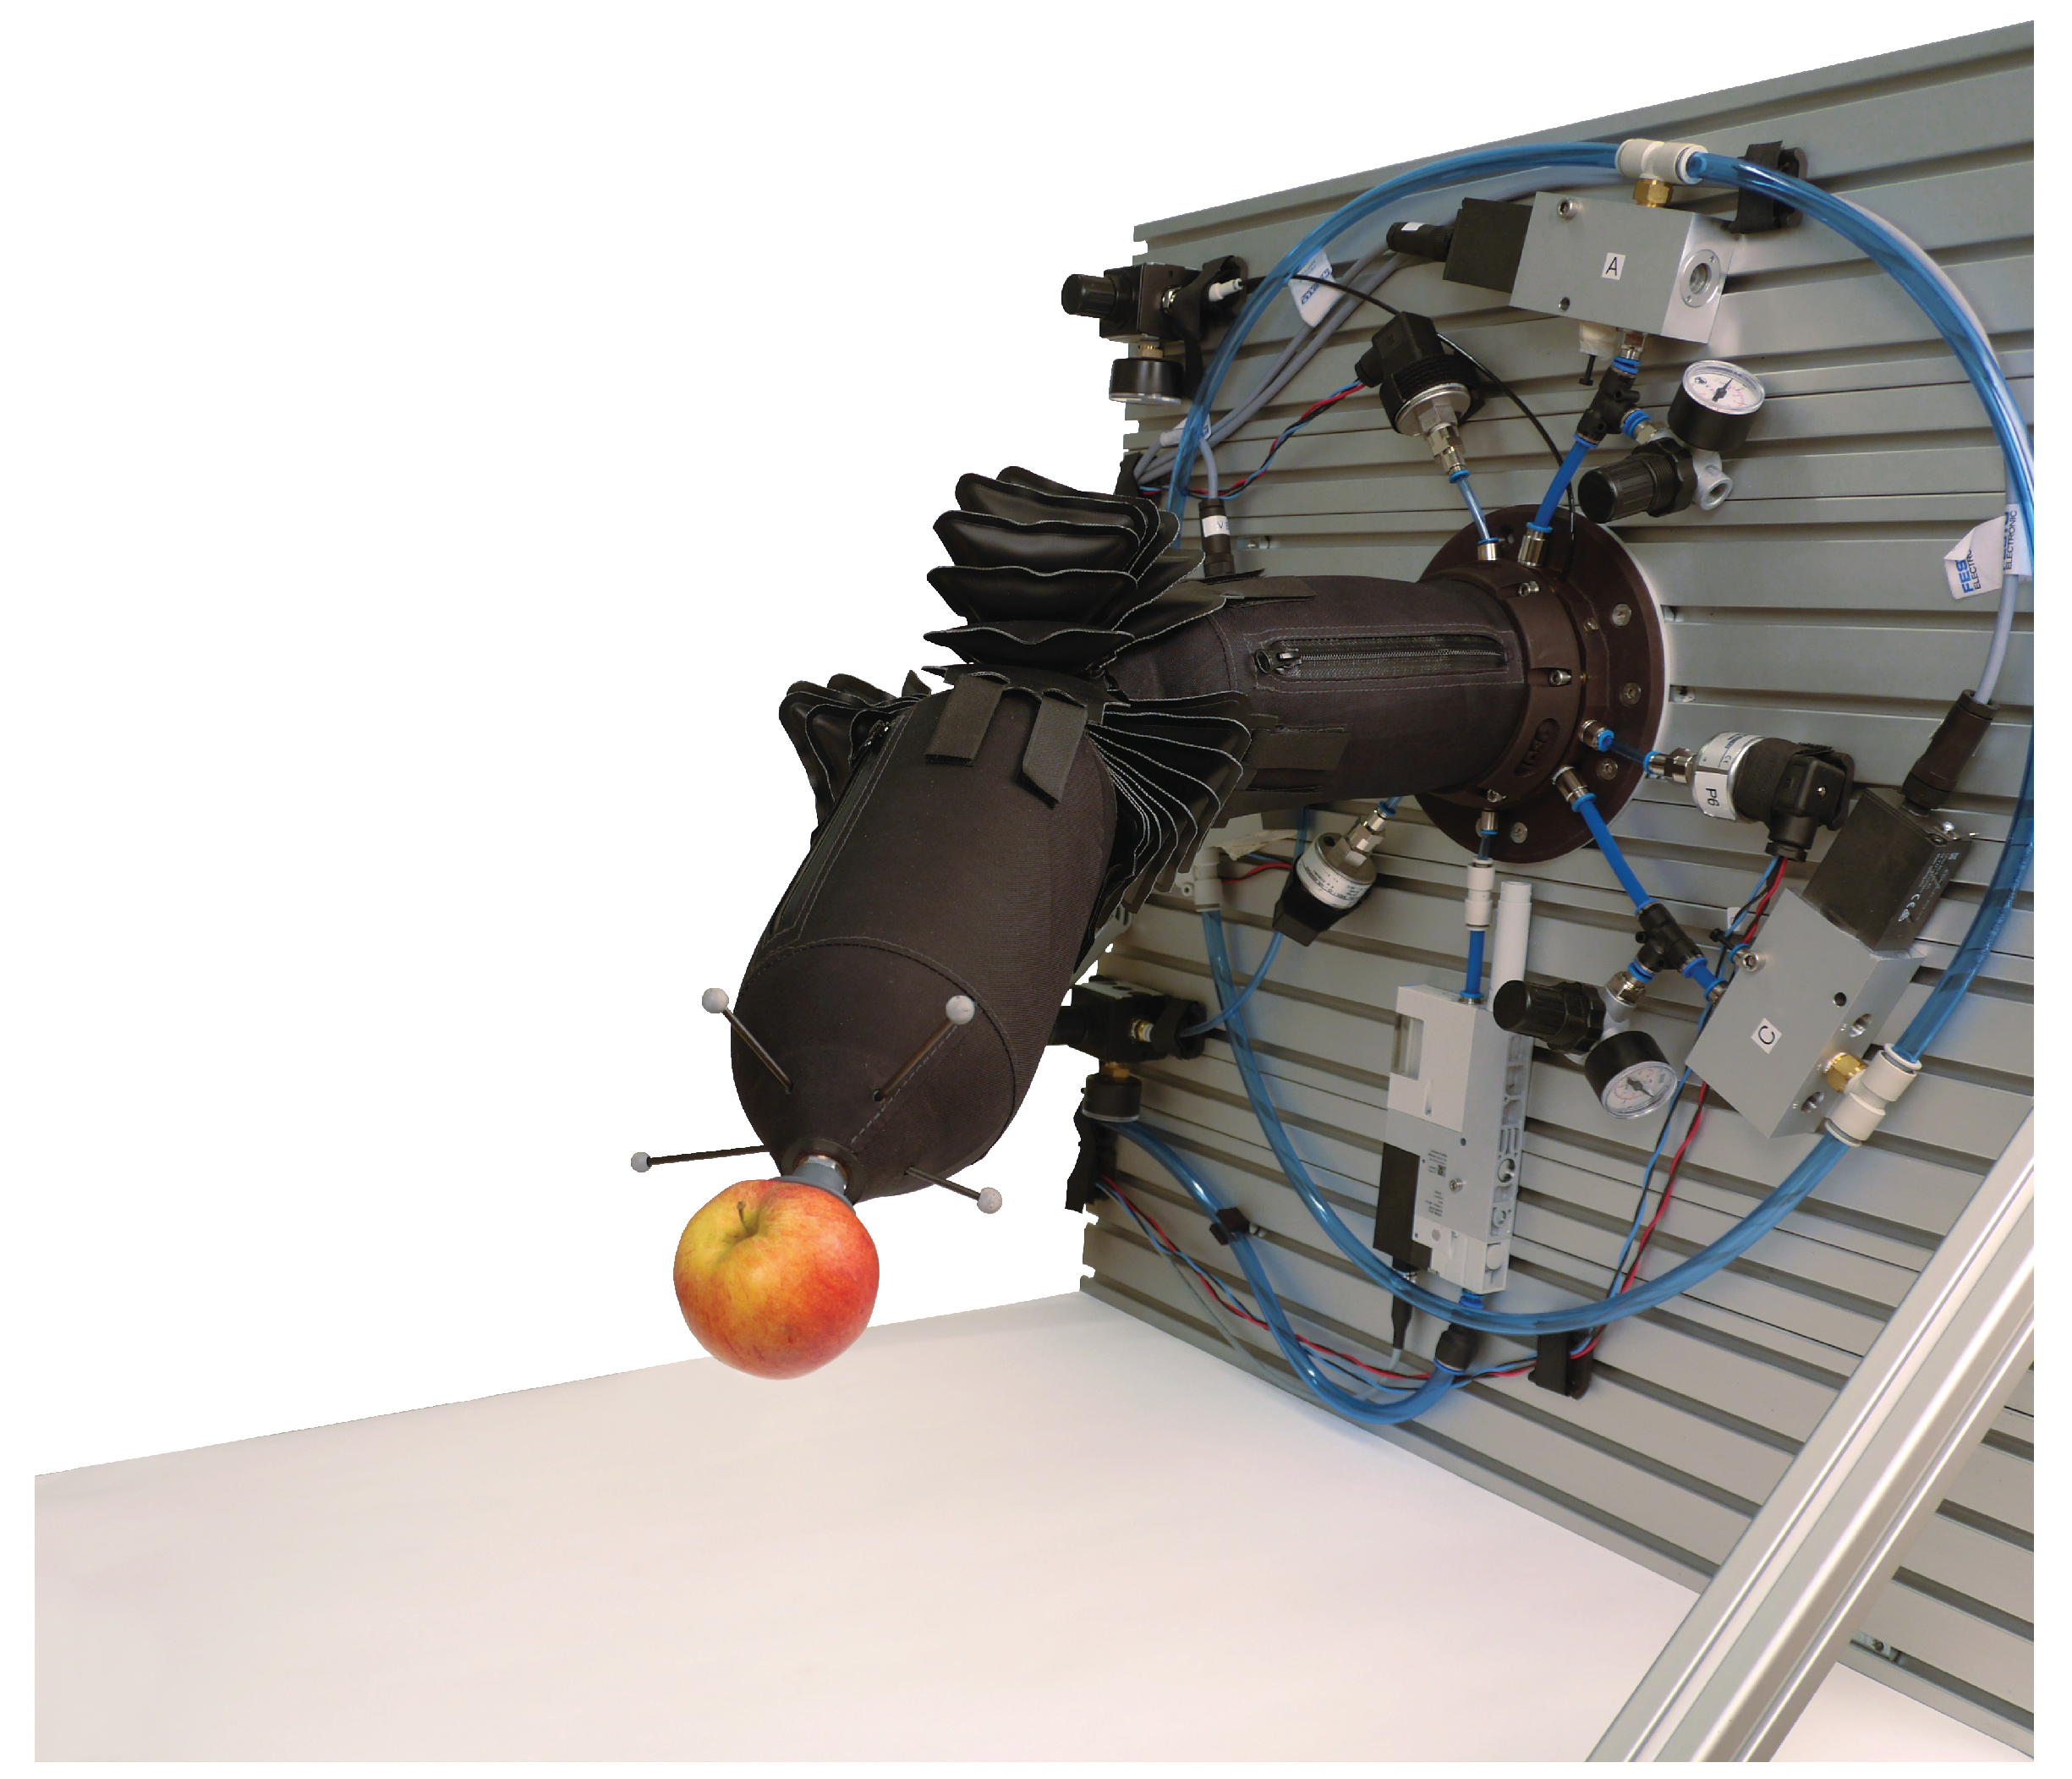 Actuators | Free Full-Text | Design and Control of an Inflatable Spherical  Robotic Arm for Pick and Place Applications | HTML